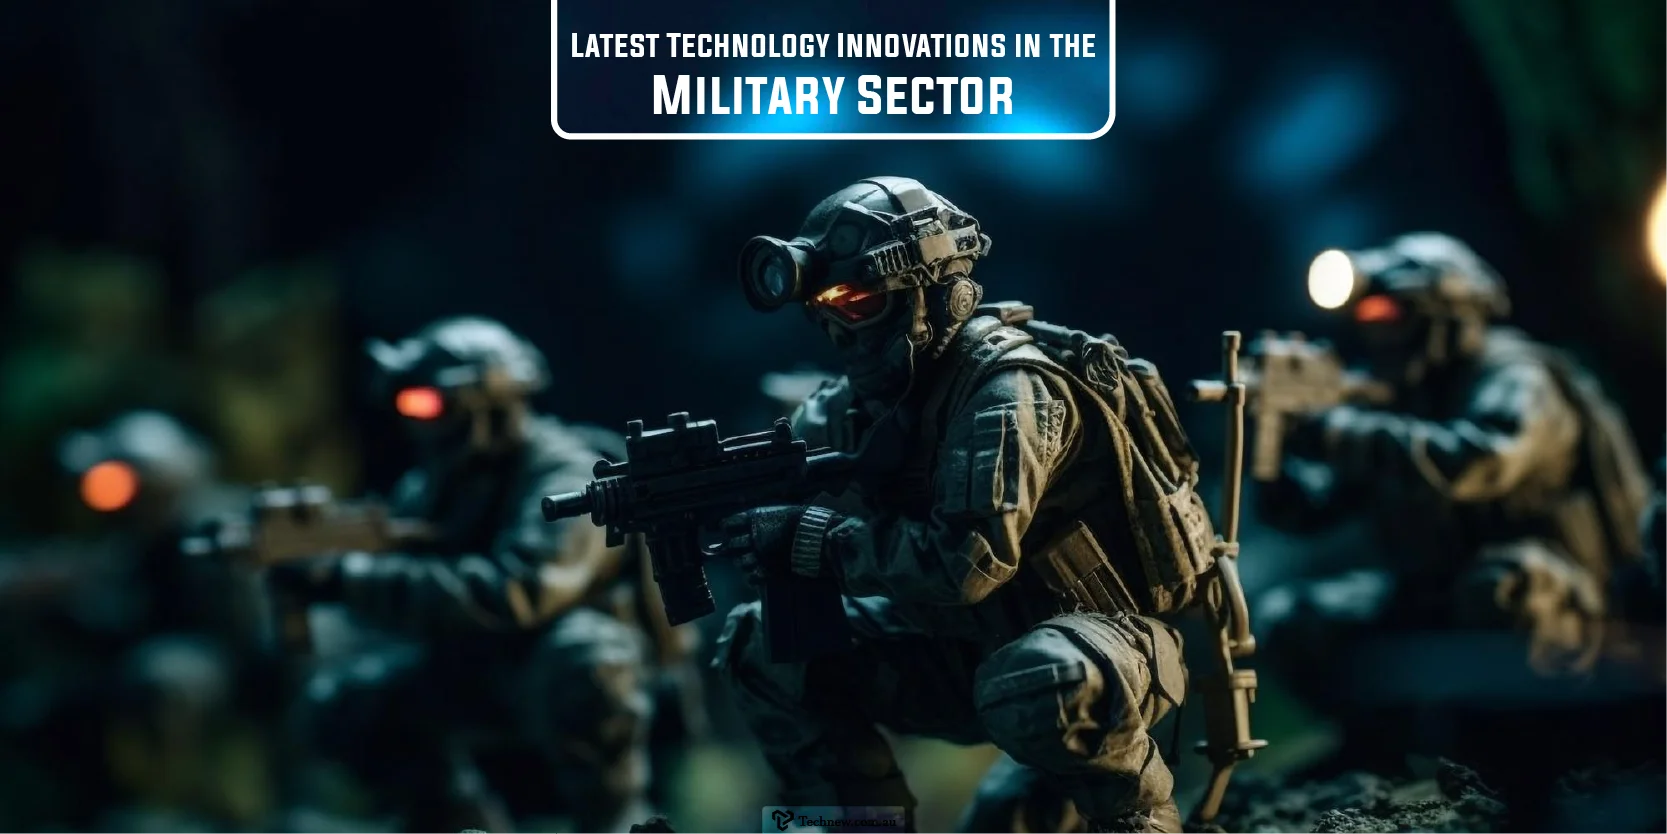 Latest Technology Innovations in the Military Sector